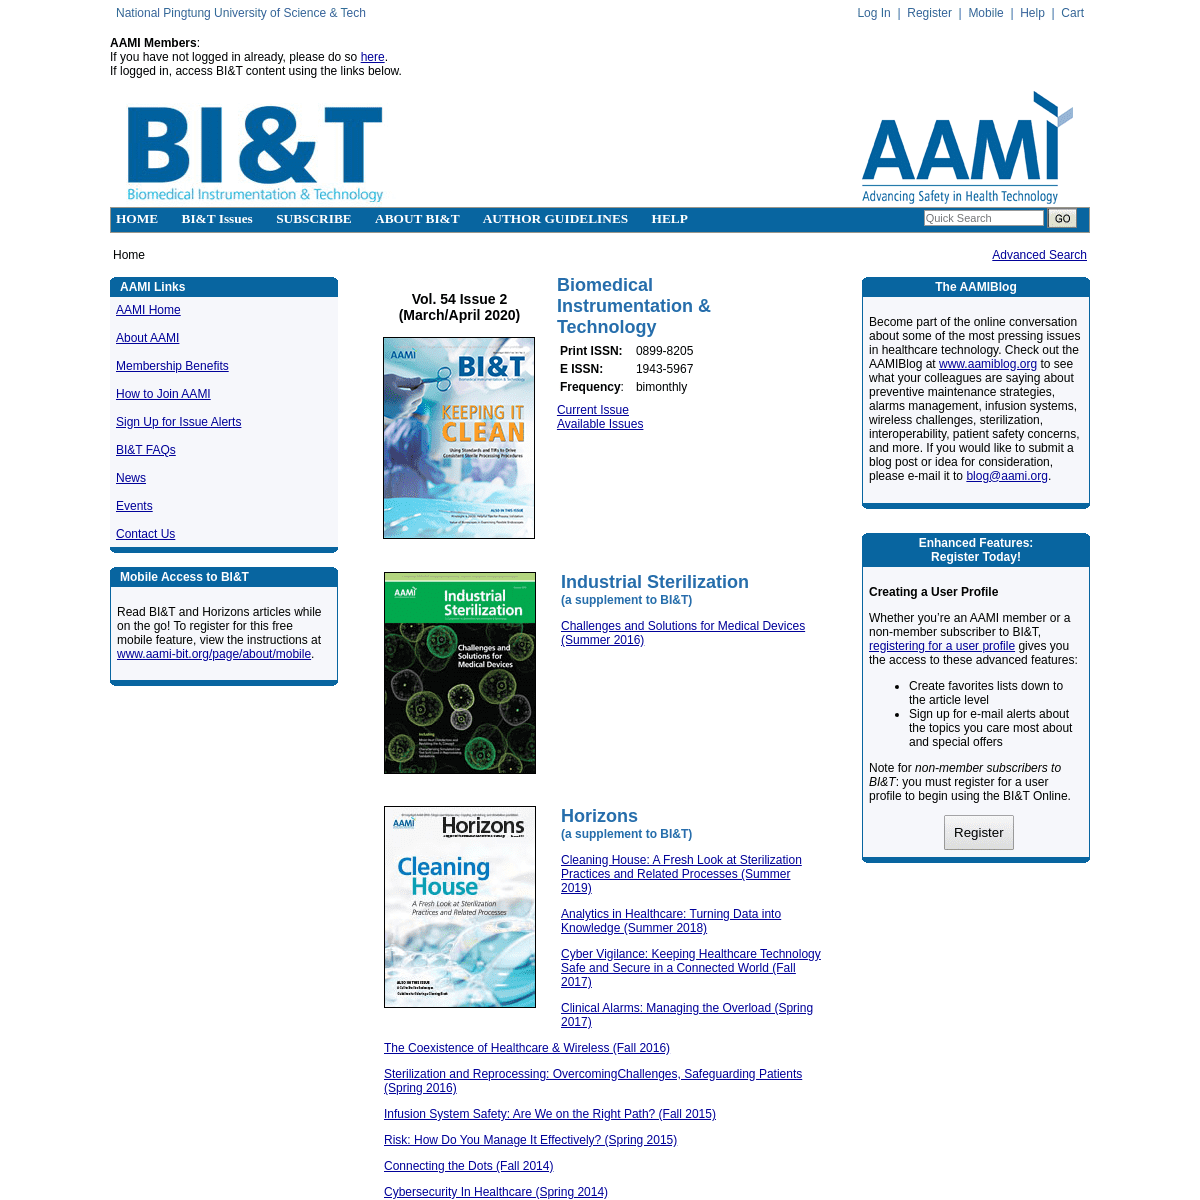 A complete backup of aami-bit.org